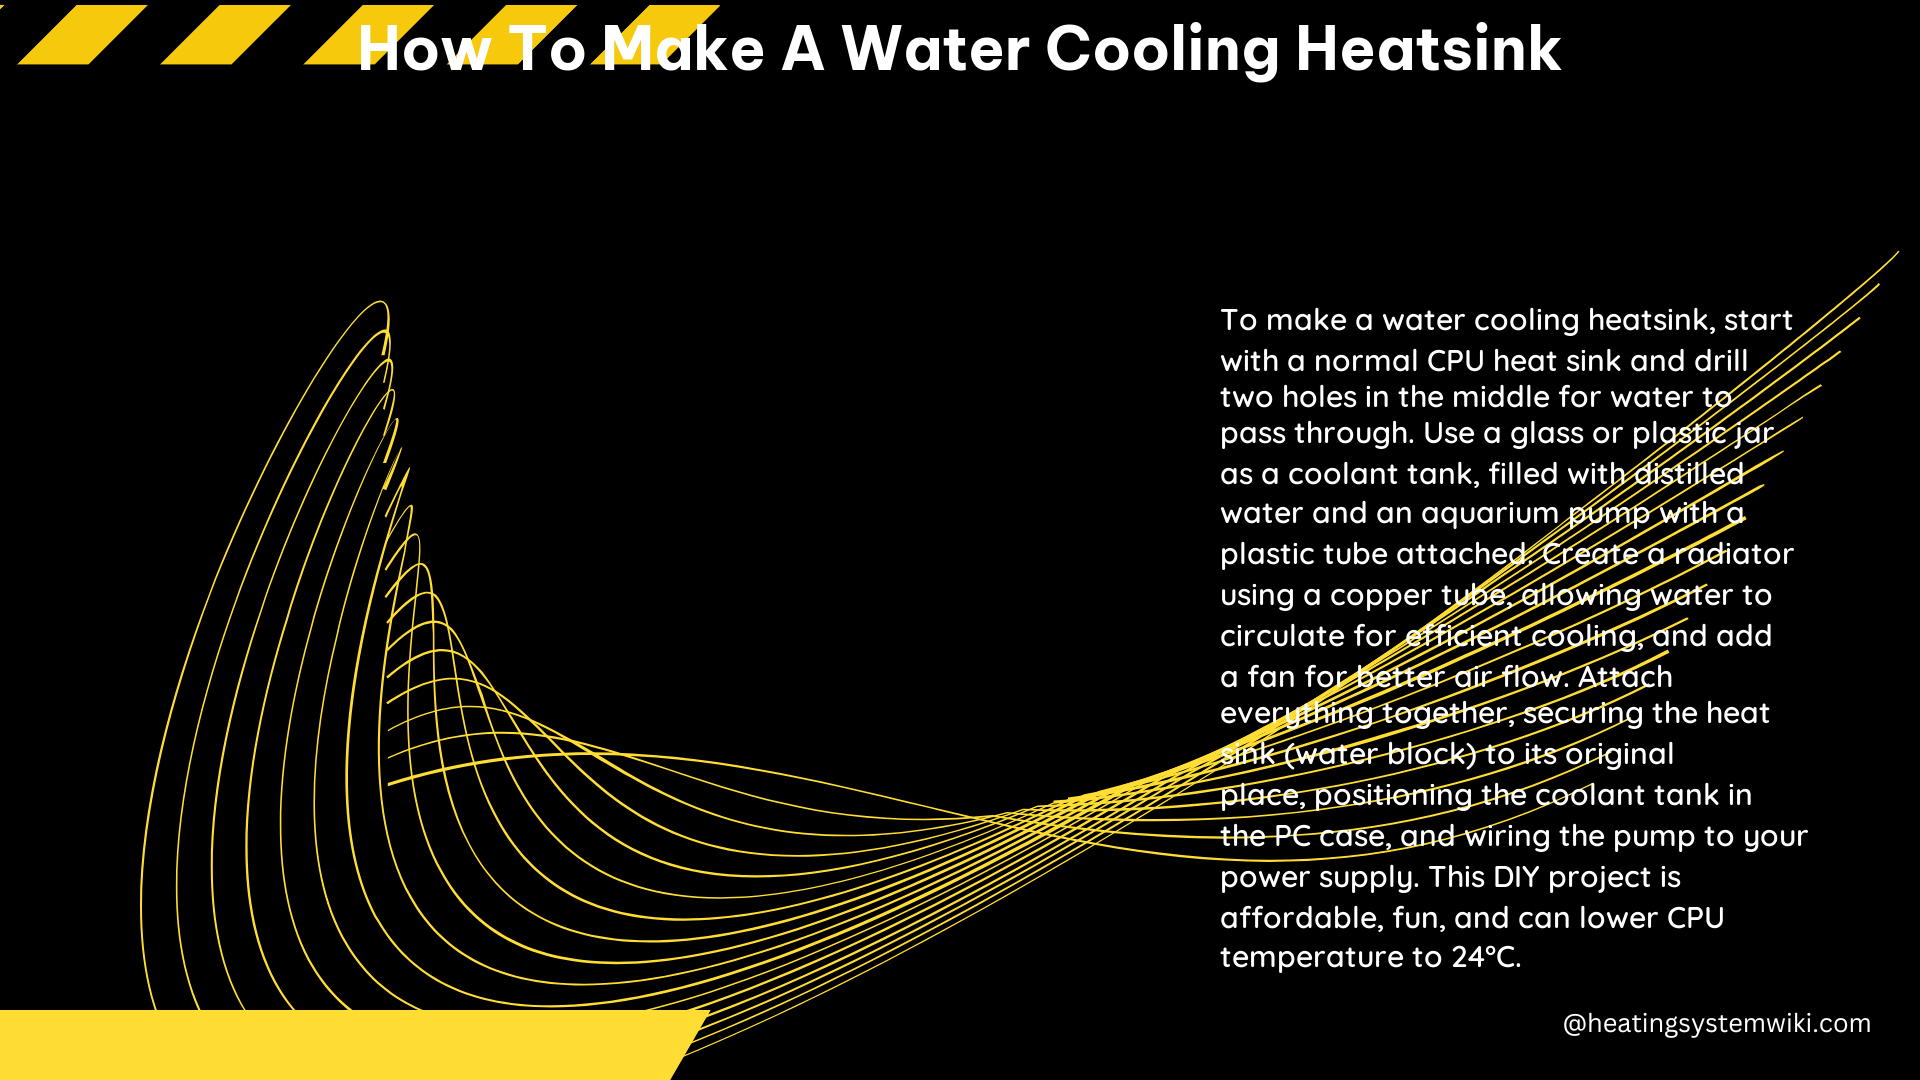 How to Make a Water Cooling Heatsink